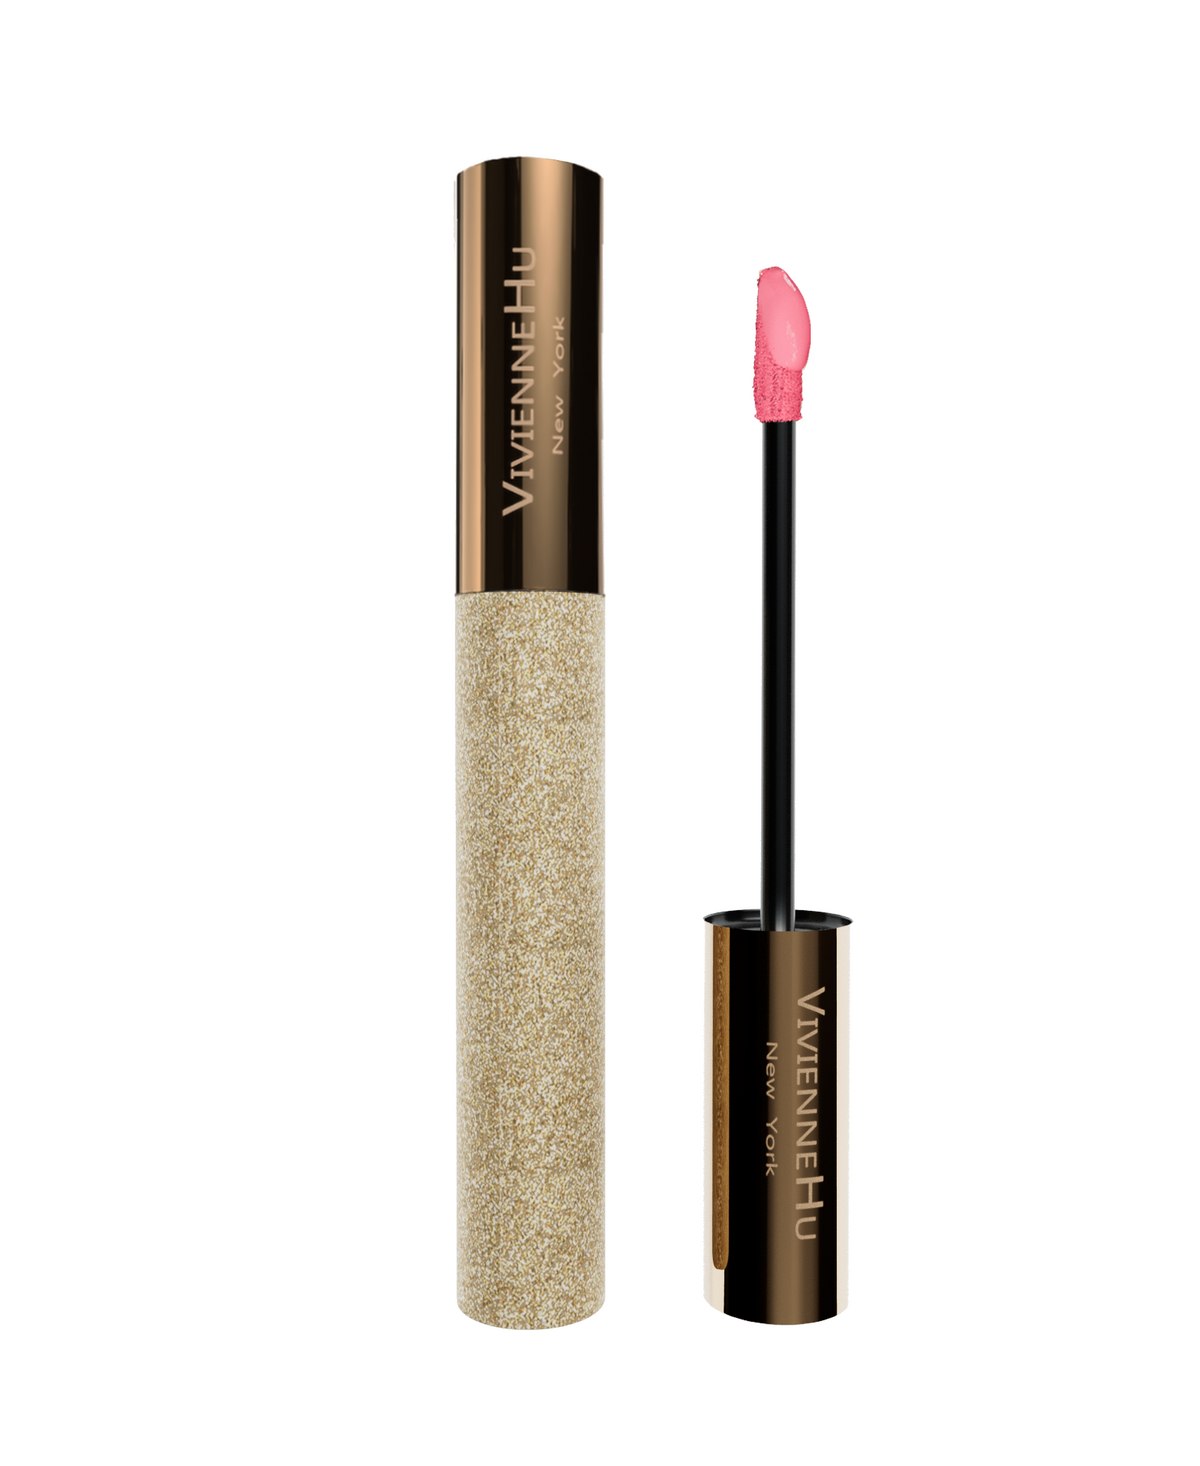 GOLDSAND LONG-TERM HYDRATION EFFECT LIP PLUMPING GLOSS – WITH HYALURONIC ACID|809 NUDEPINK